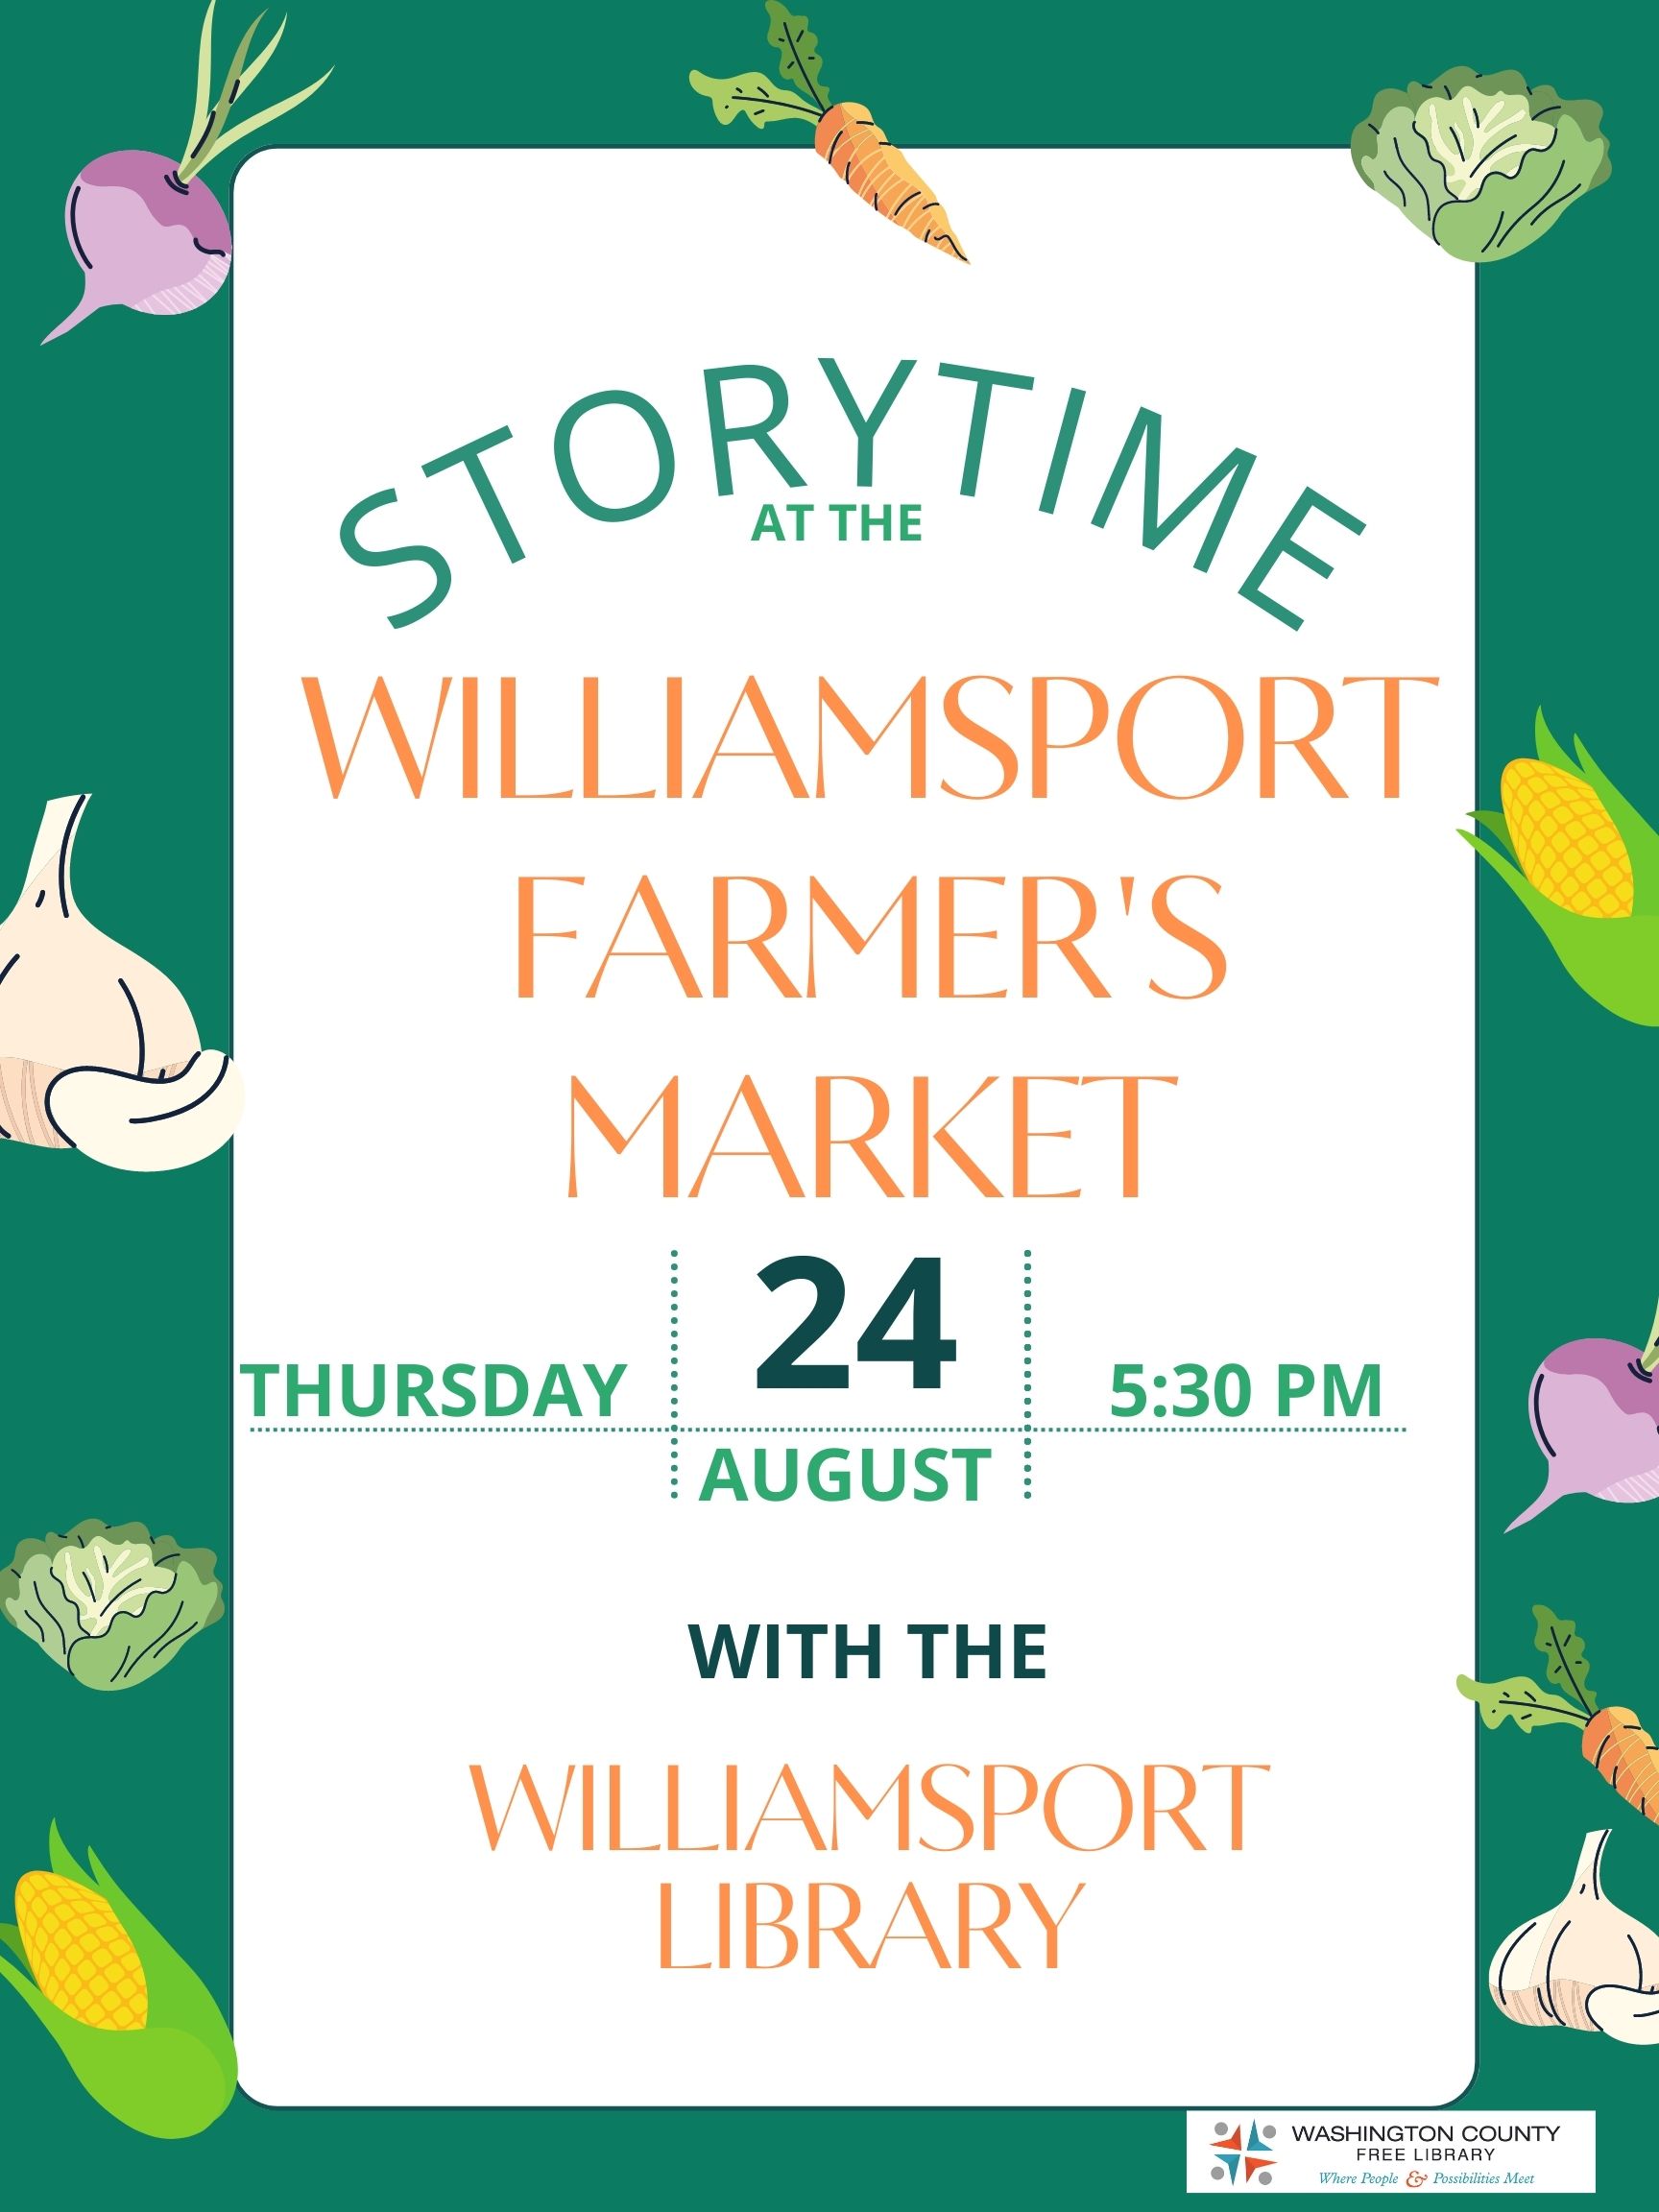 Green background with vegetables. Storytime at the Williamsport Farmers Market August 24 5:30 pm 